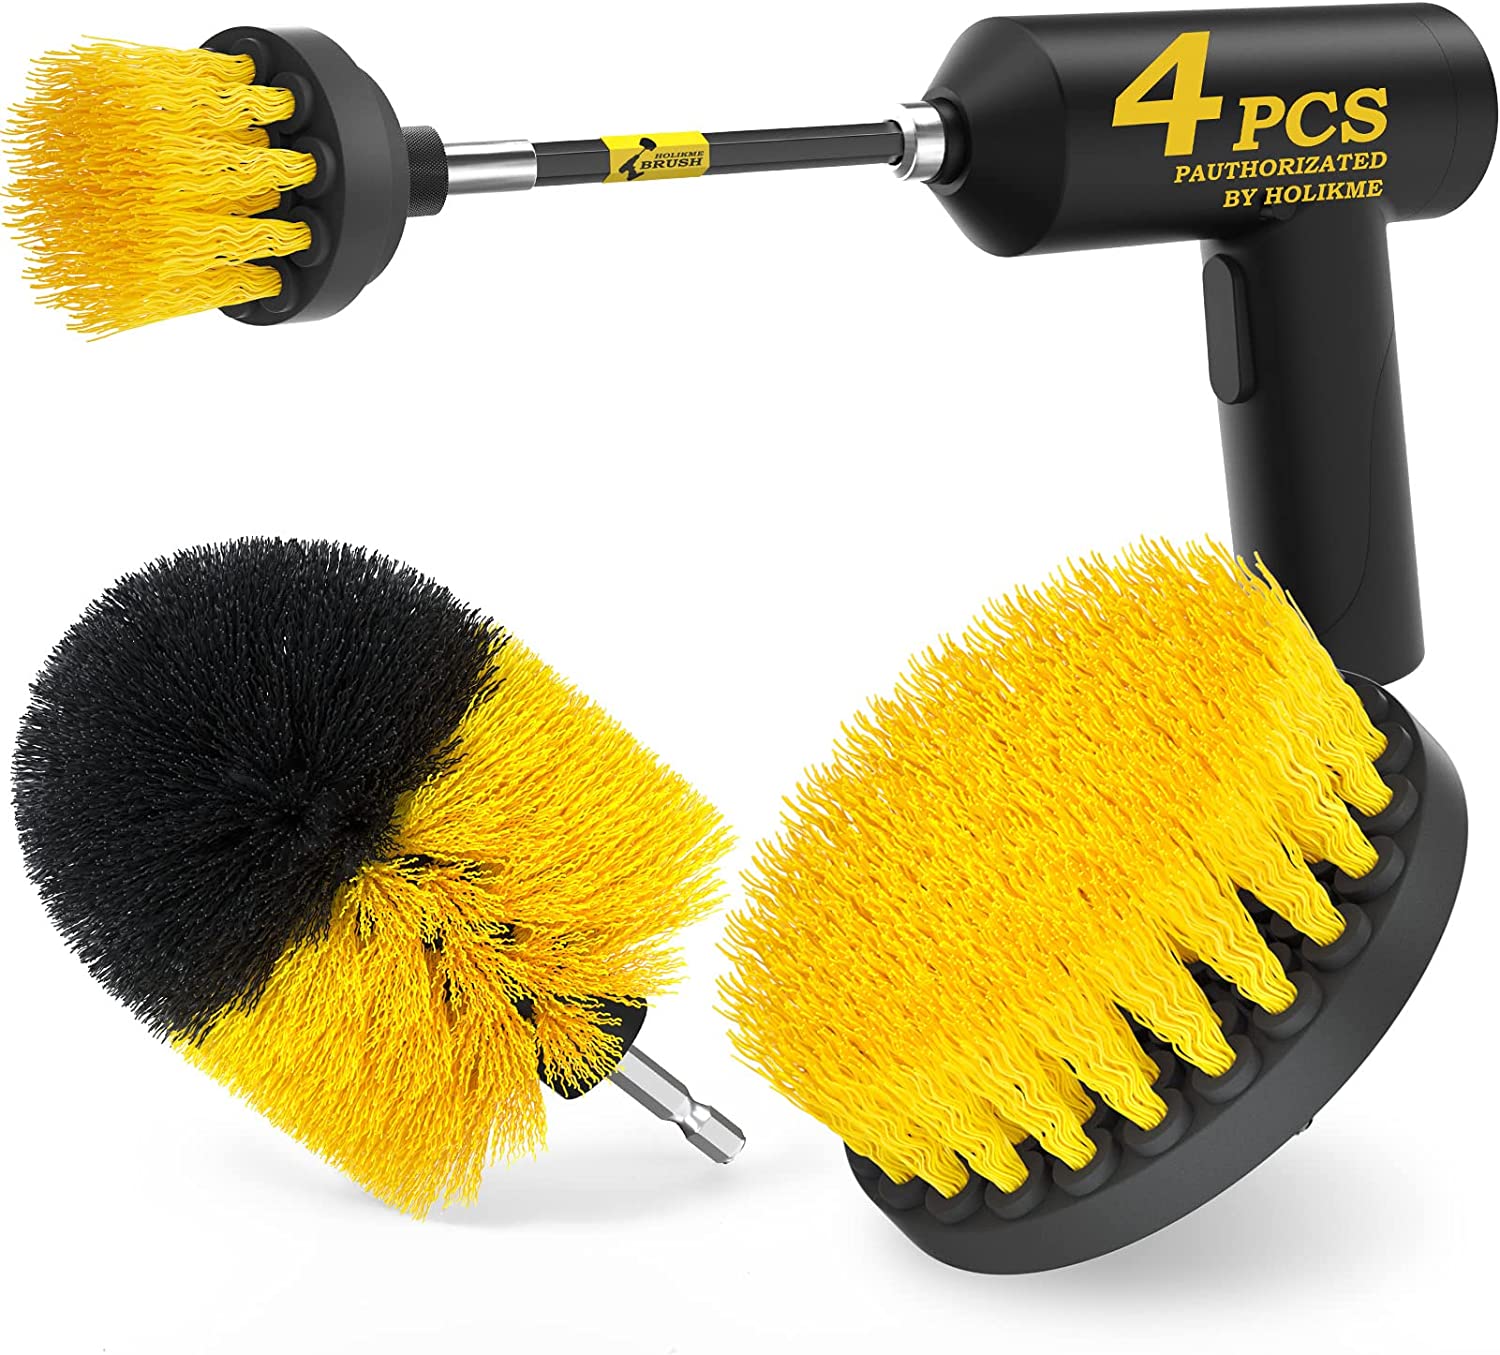 The Best Drill Brushes for Auto Detailing